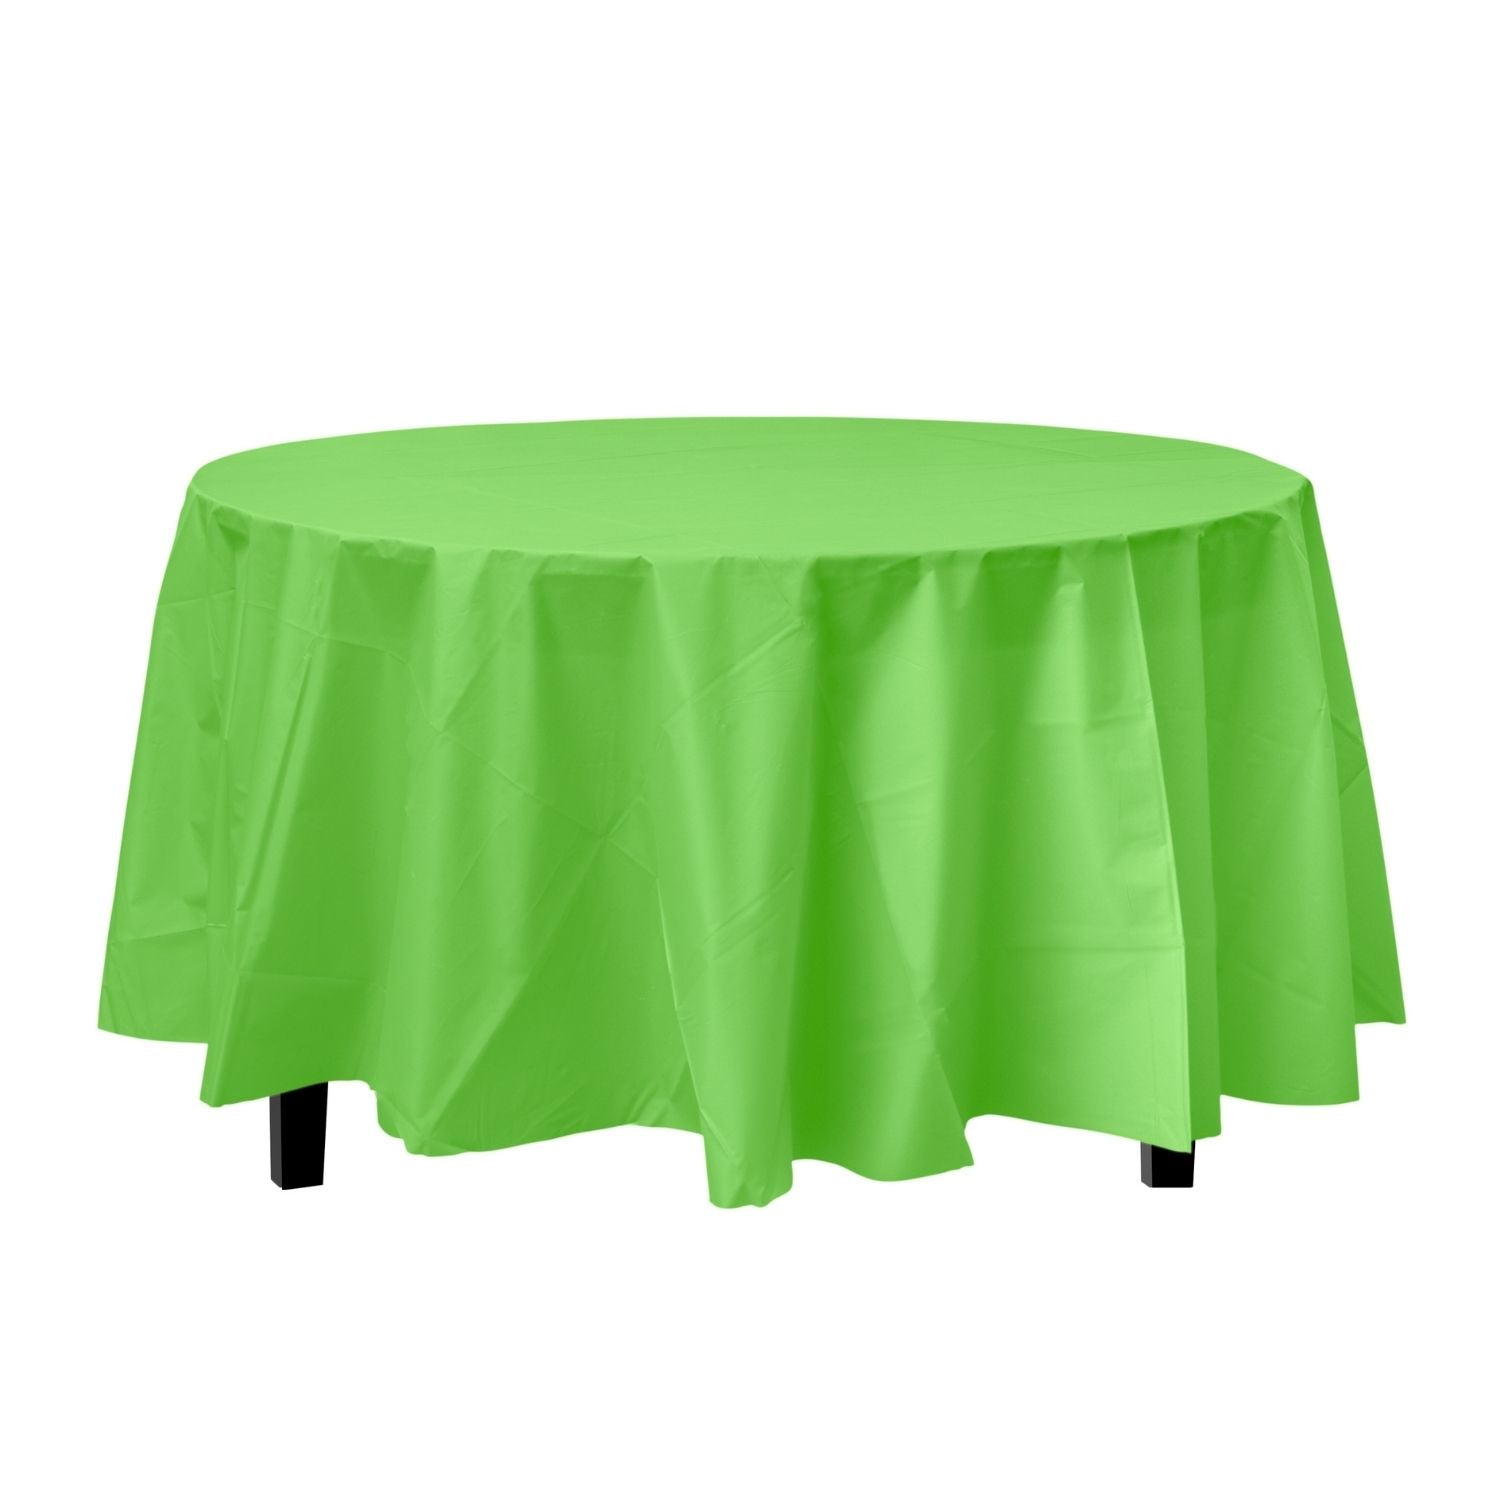 Premium Round Lime Green Plastic Tablecloth | 96 Count - Yom Tov Settings